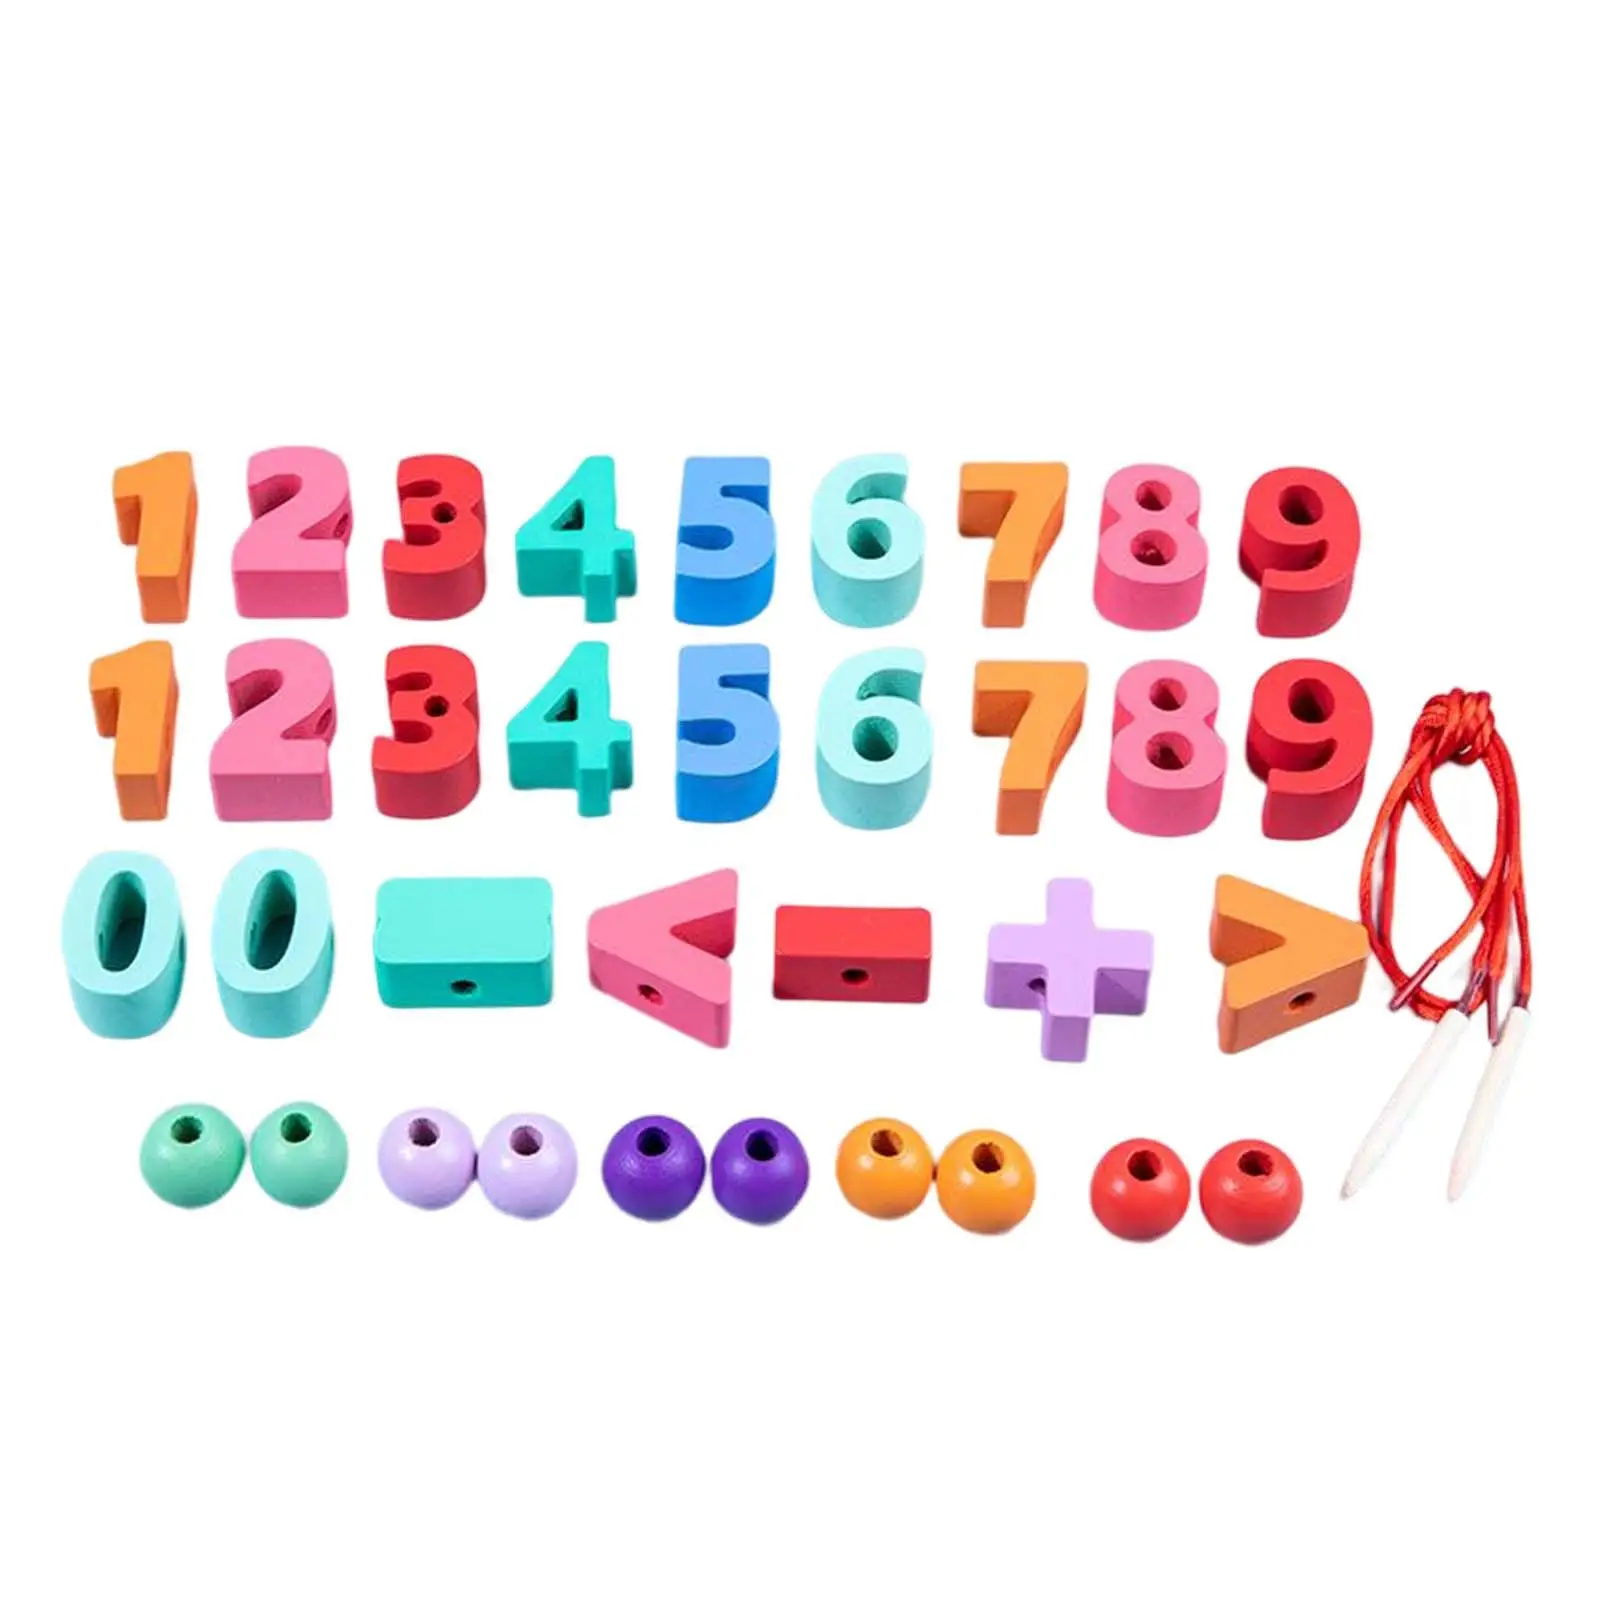 Threading Toys Developmental Toy Lacing Beads Set for Educational Gifts